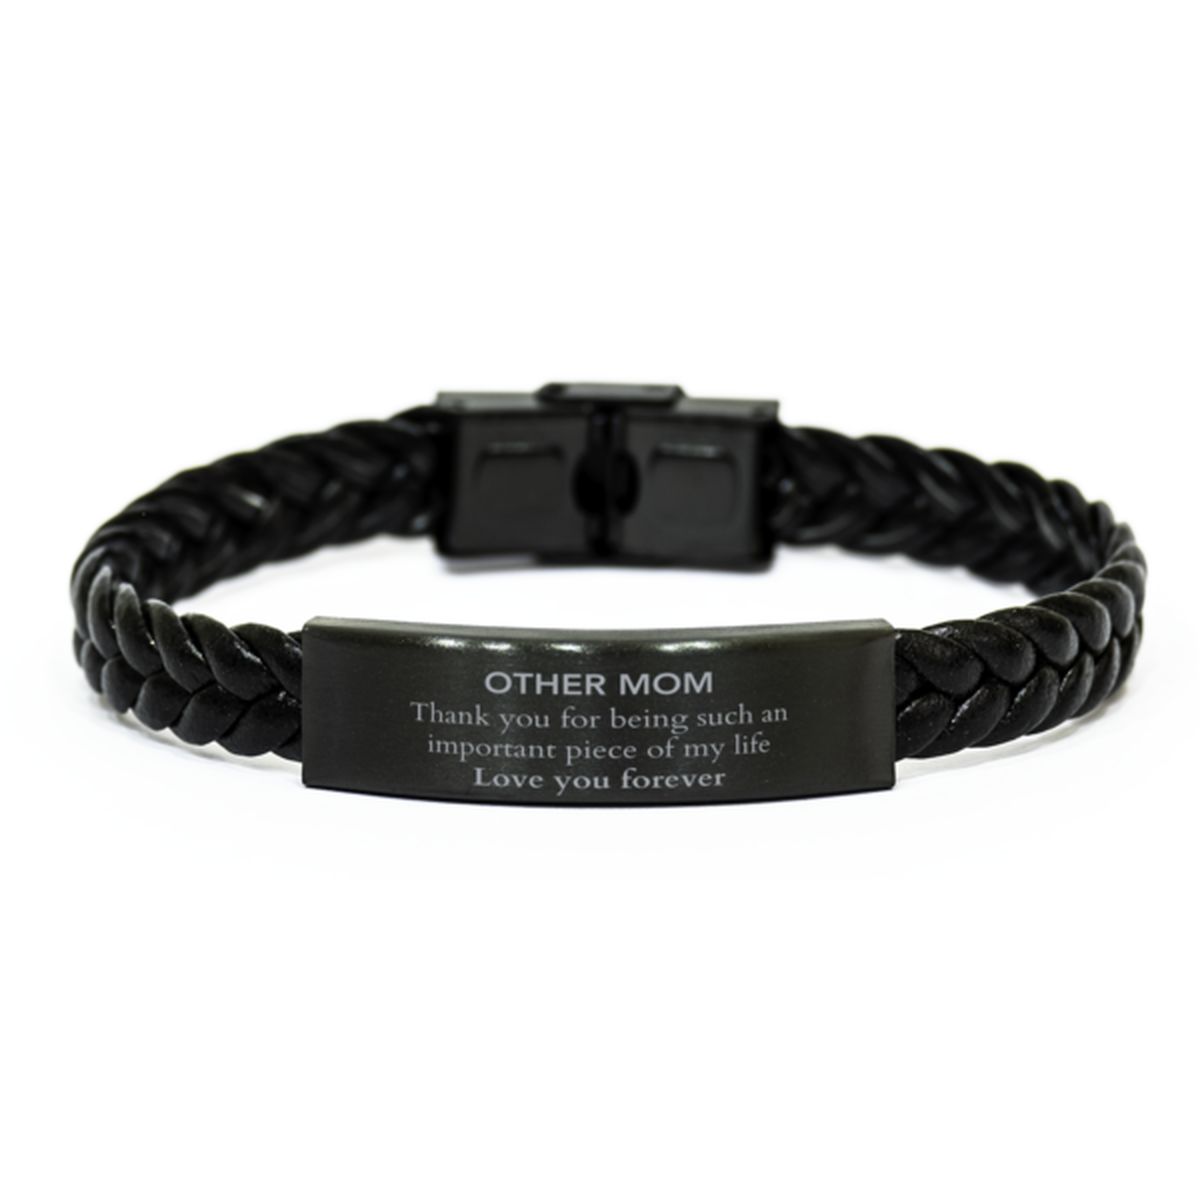 Appropriate Other Mom Braided Leather Bracelet Epic Birthday Gifts for Other Mom Thank you for being such an important piece of my life Other Mom Christmas Mothers Fathers Day